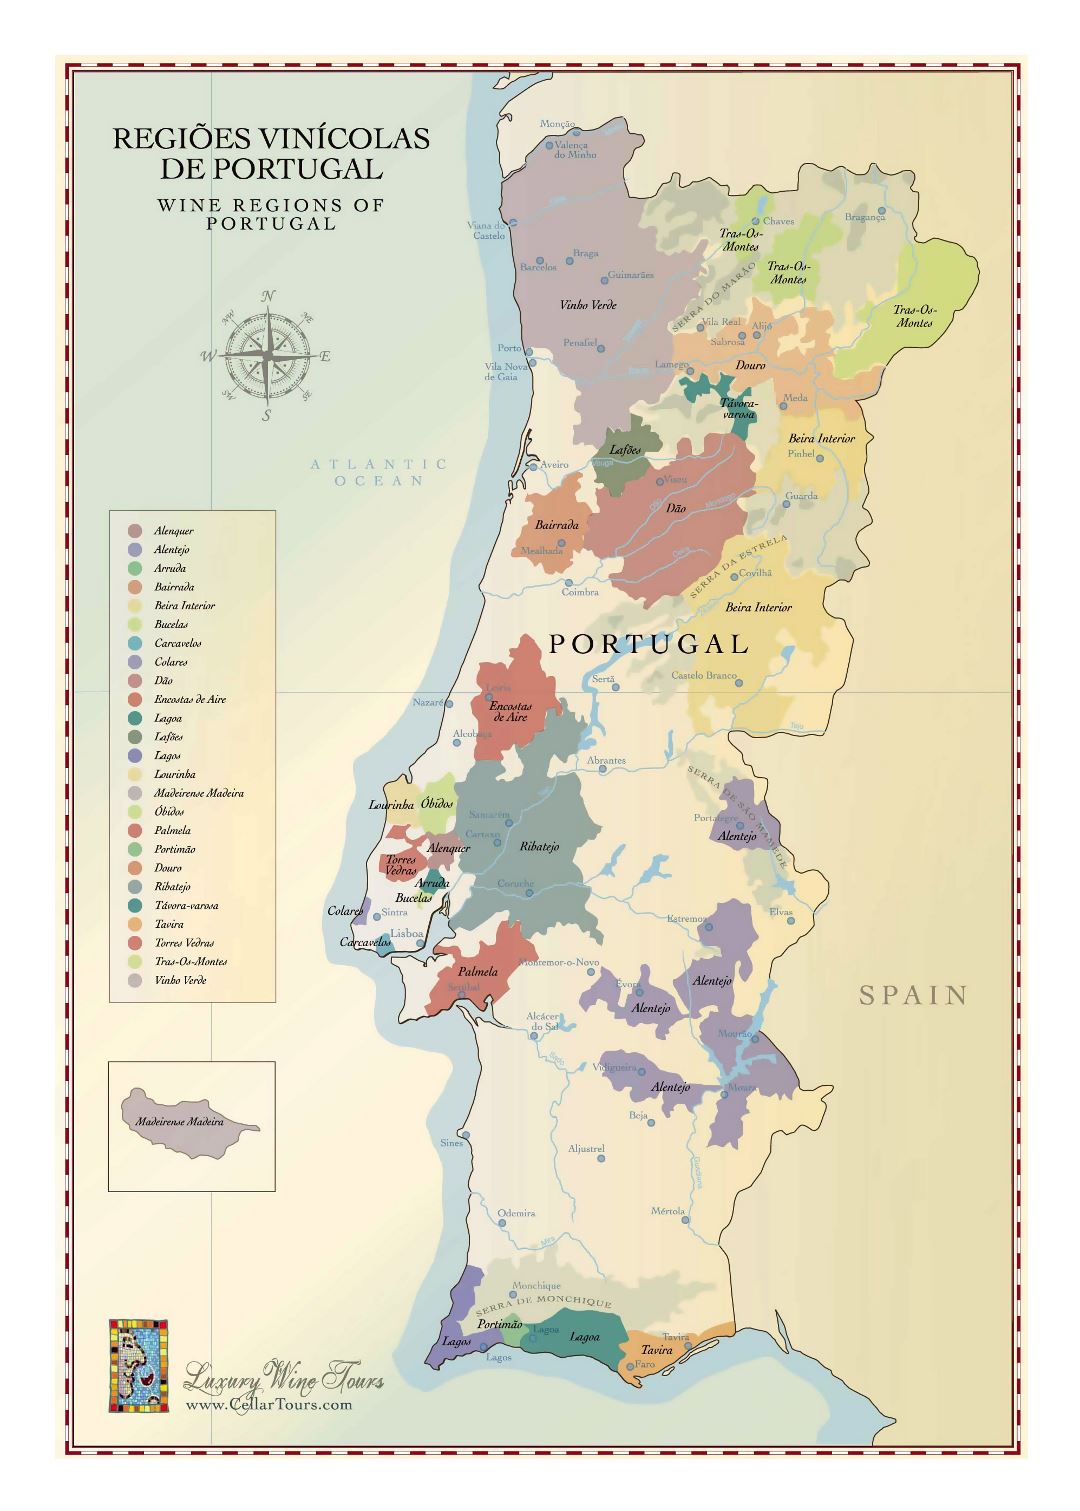 Large wine regions map of Portugal